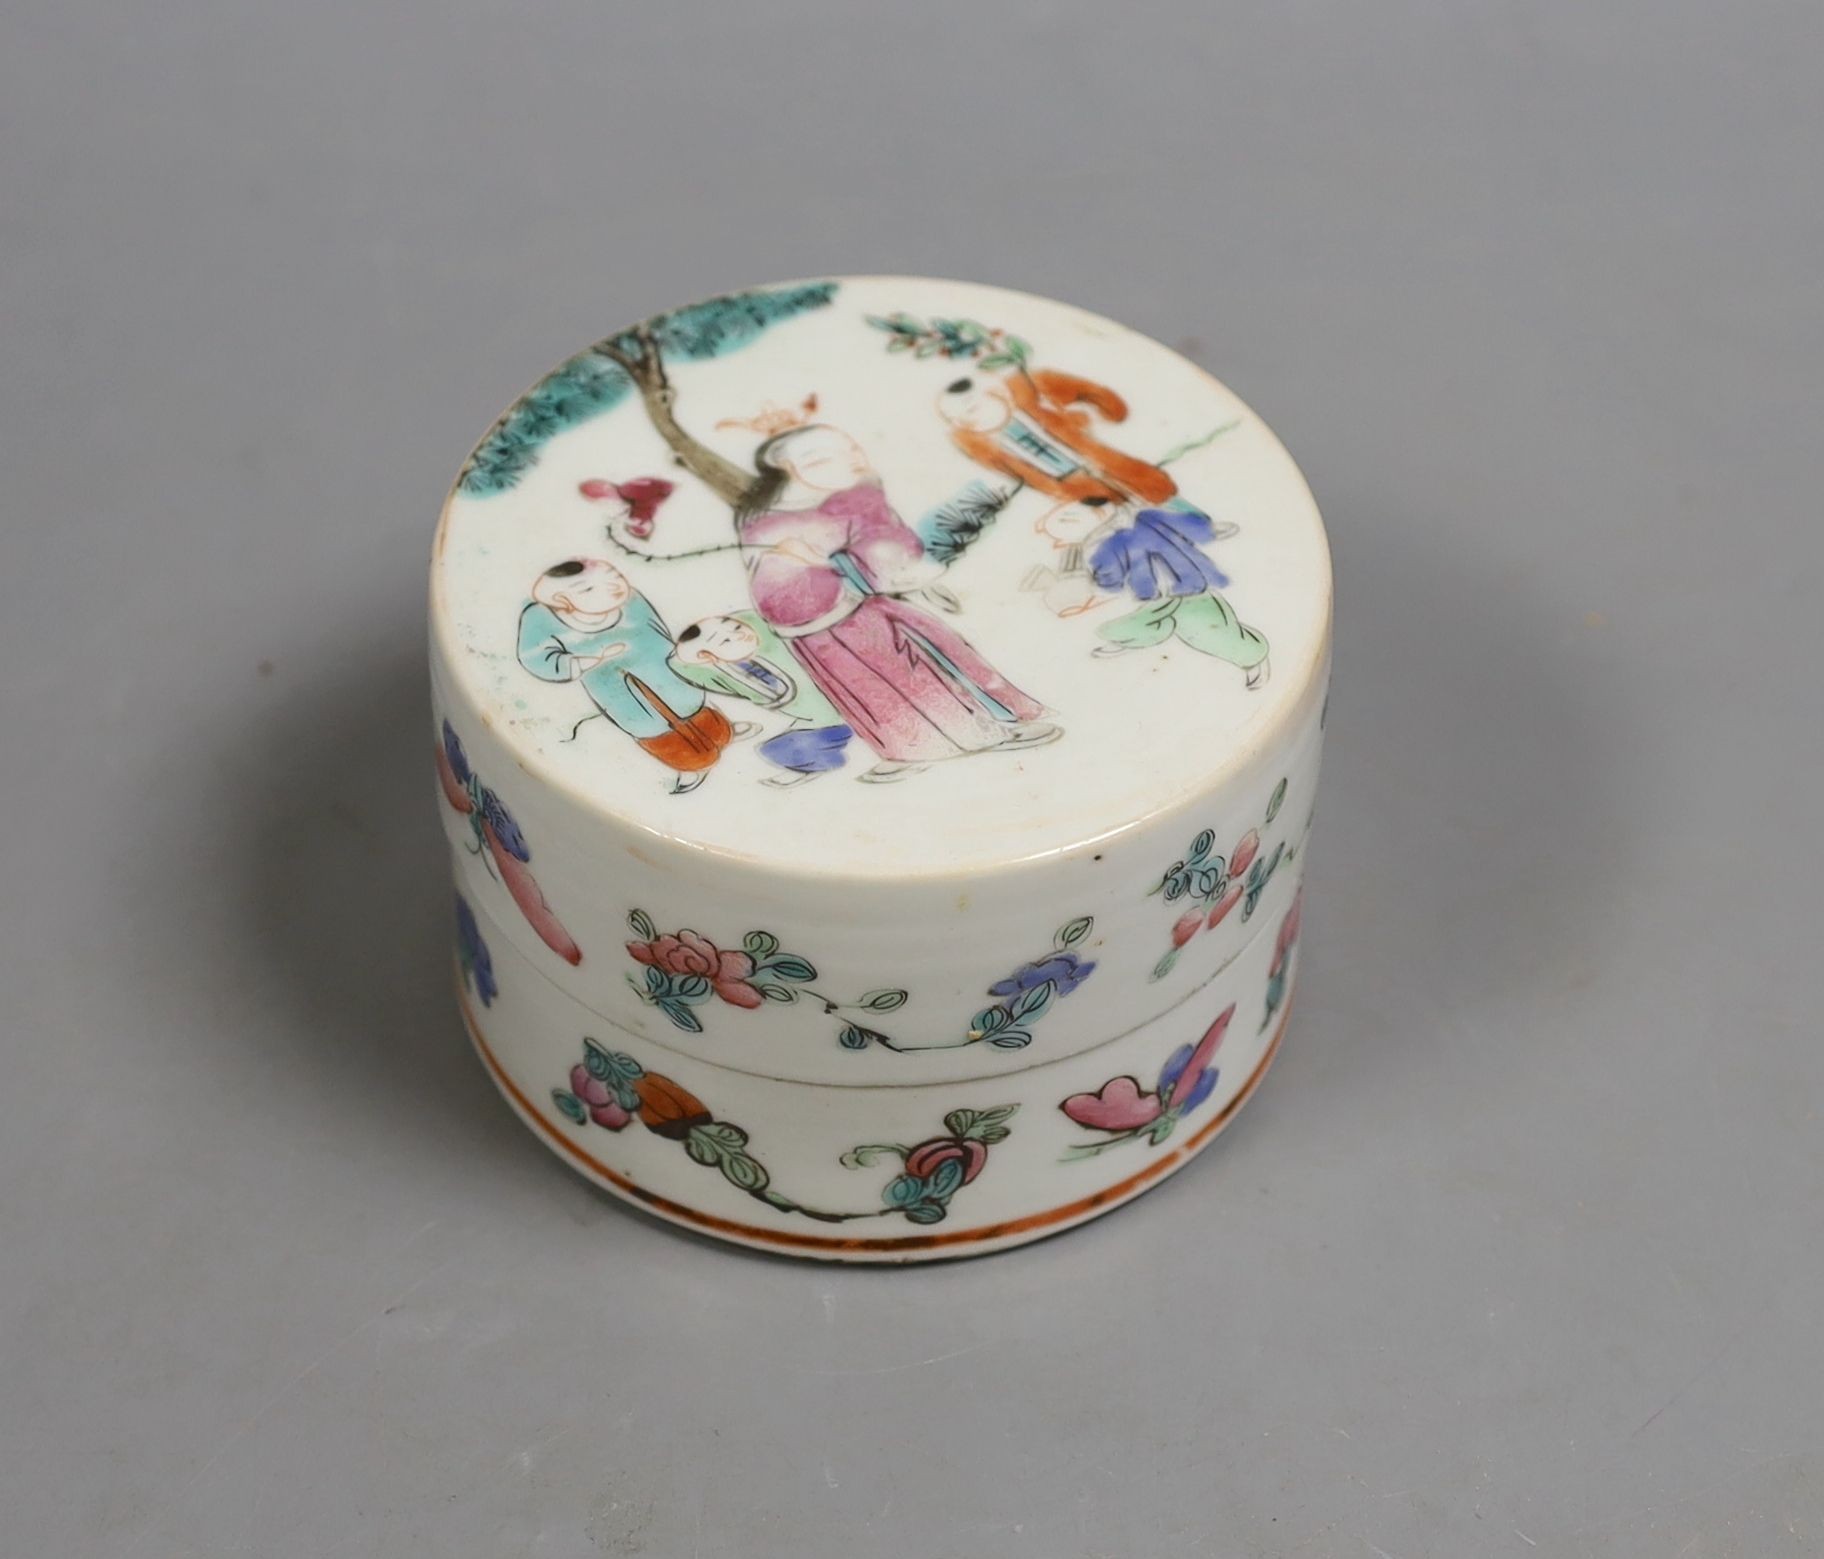 A 19th century Chinese famille rose box and cover, Liberty retail label, 9.5 cms diameter.